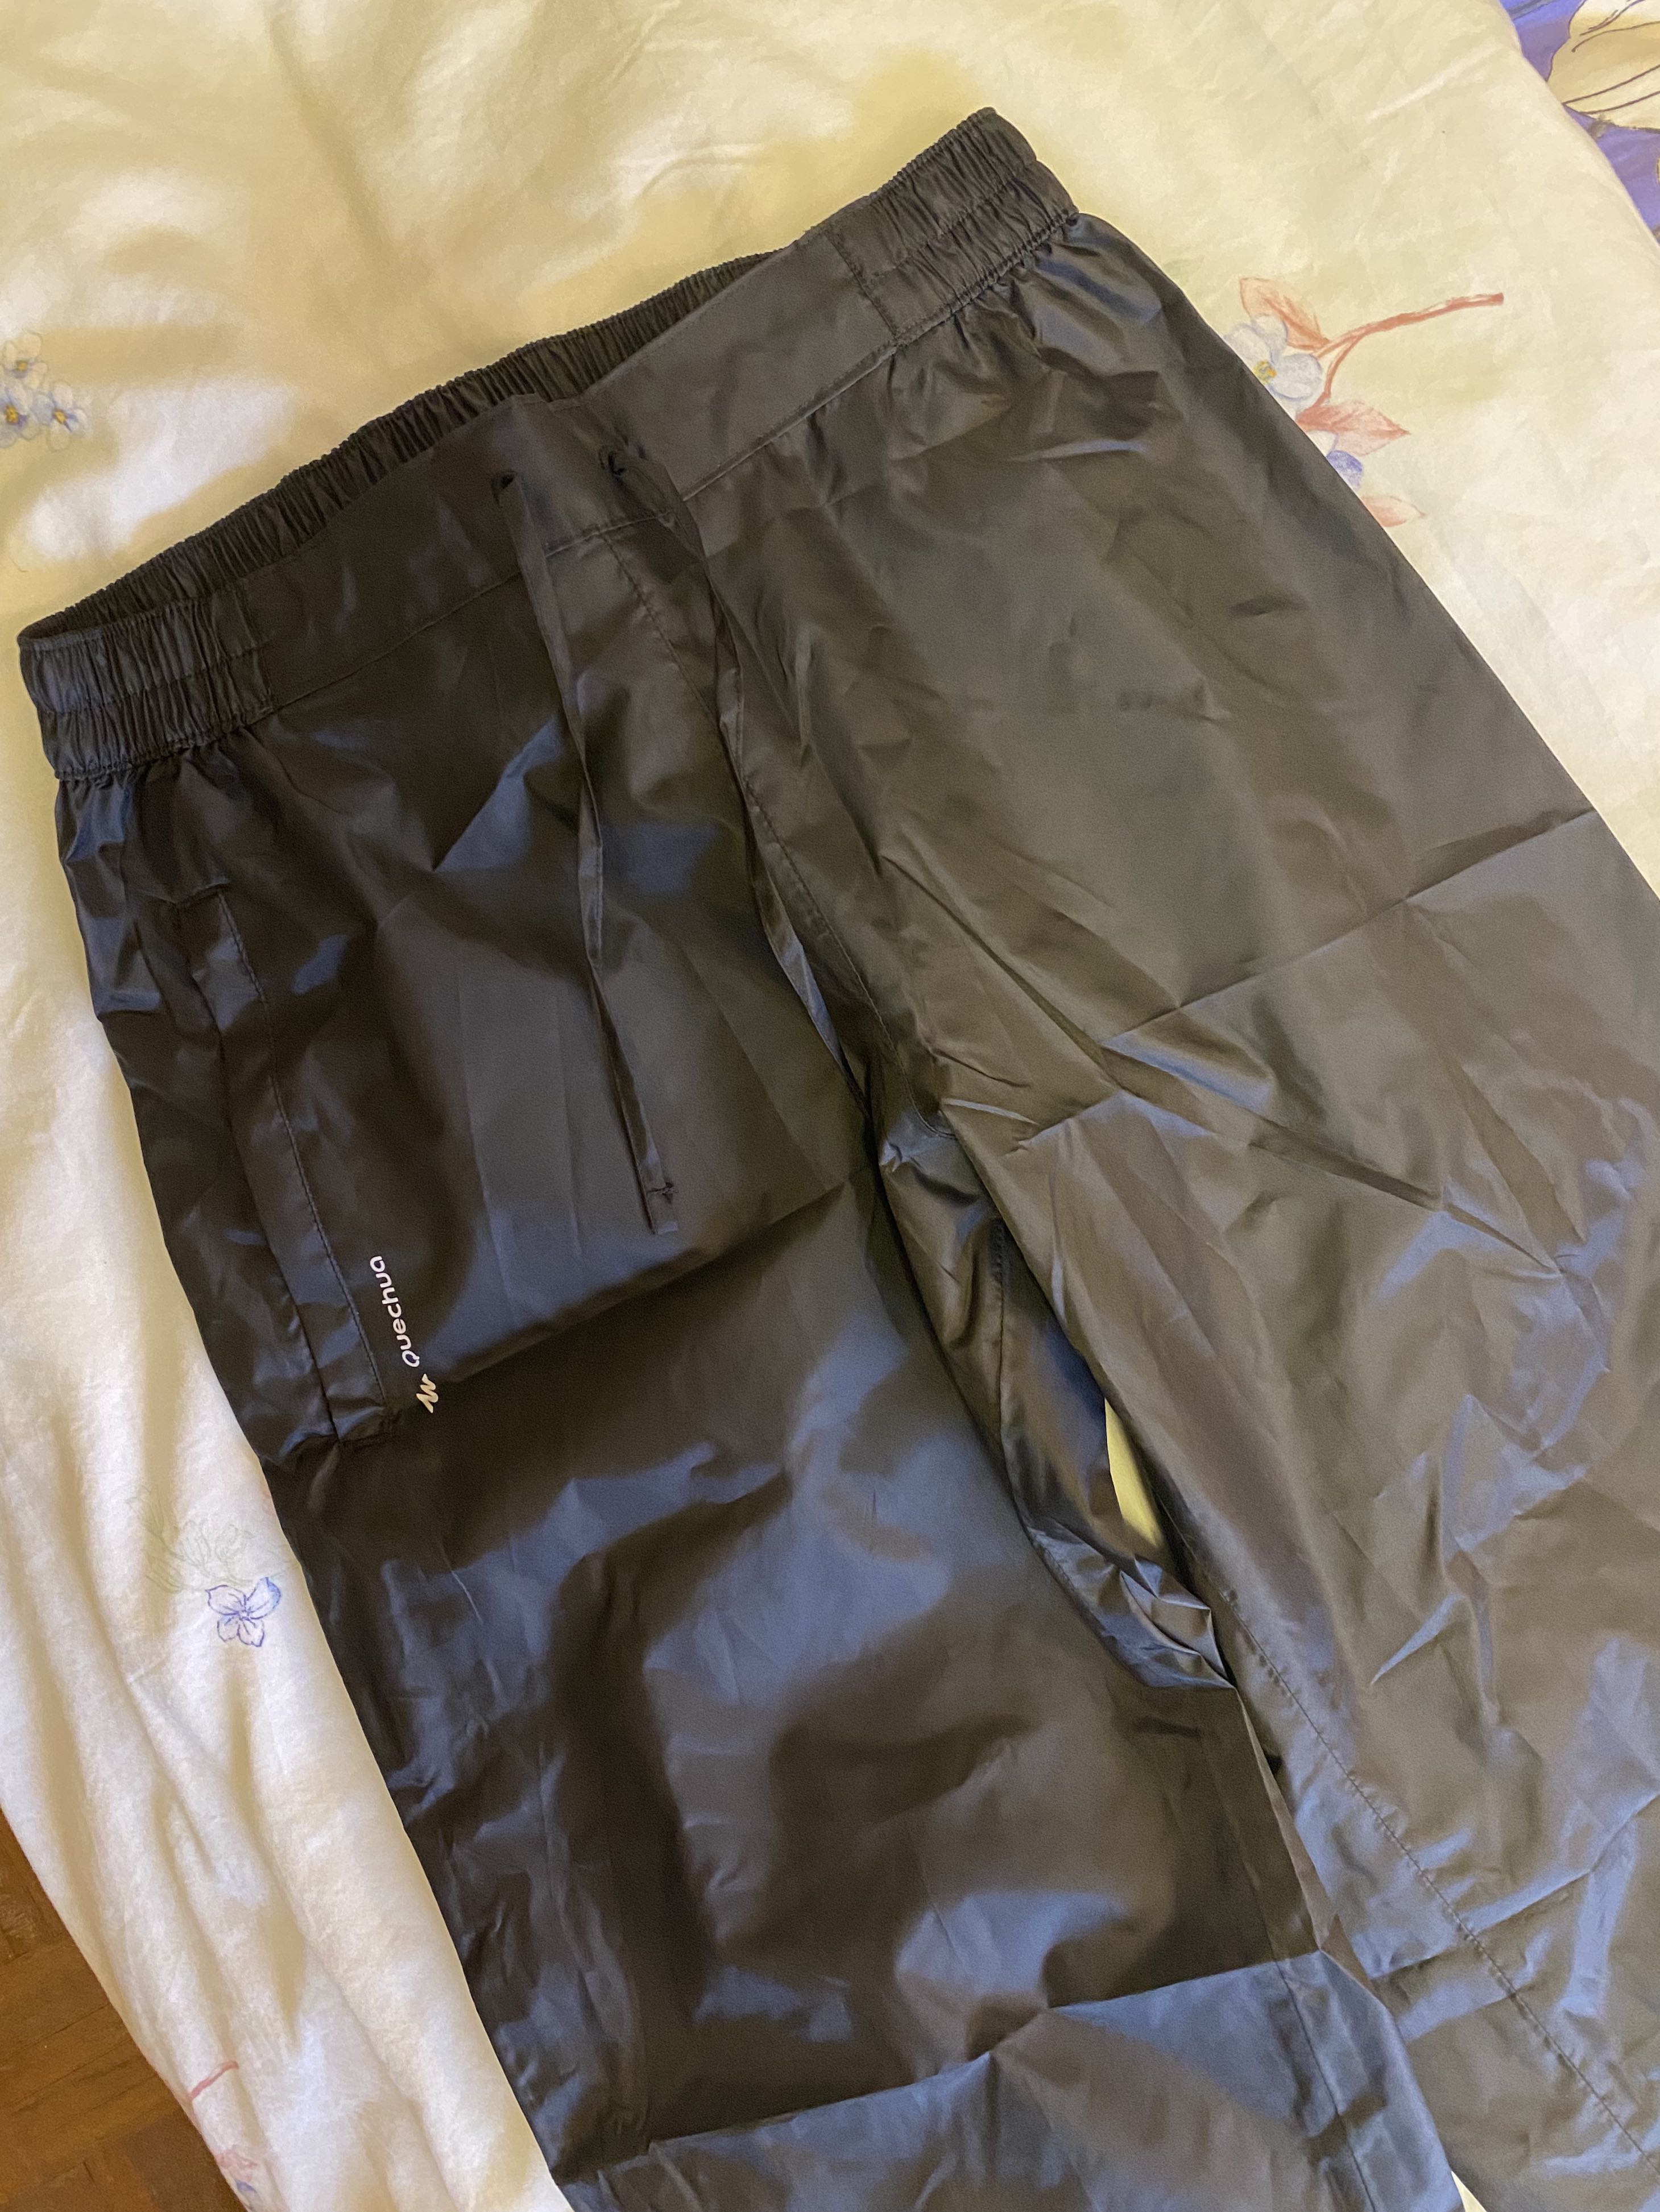 Decathlon Brand New Women's Waterproof Trousers Pants - Small W28 L31,  Sports Equipment, Hiking & Camping on Carousell